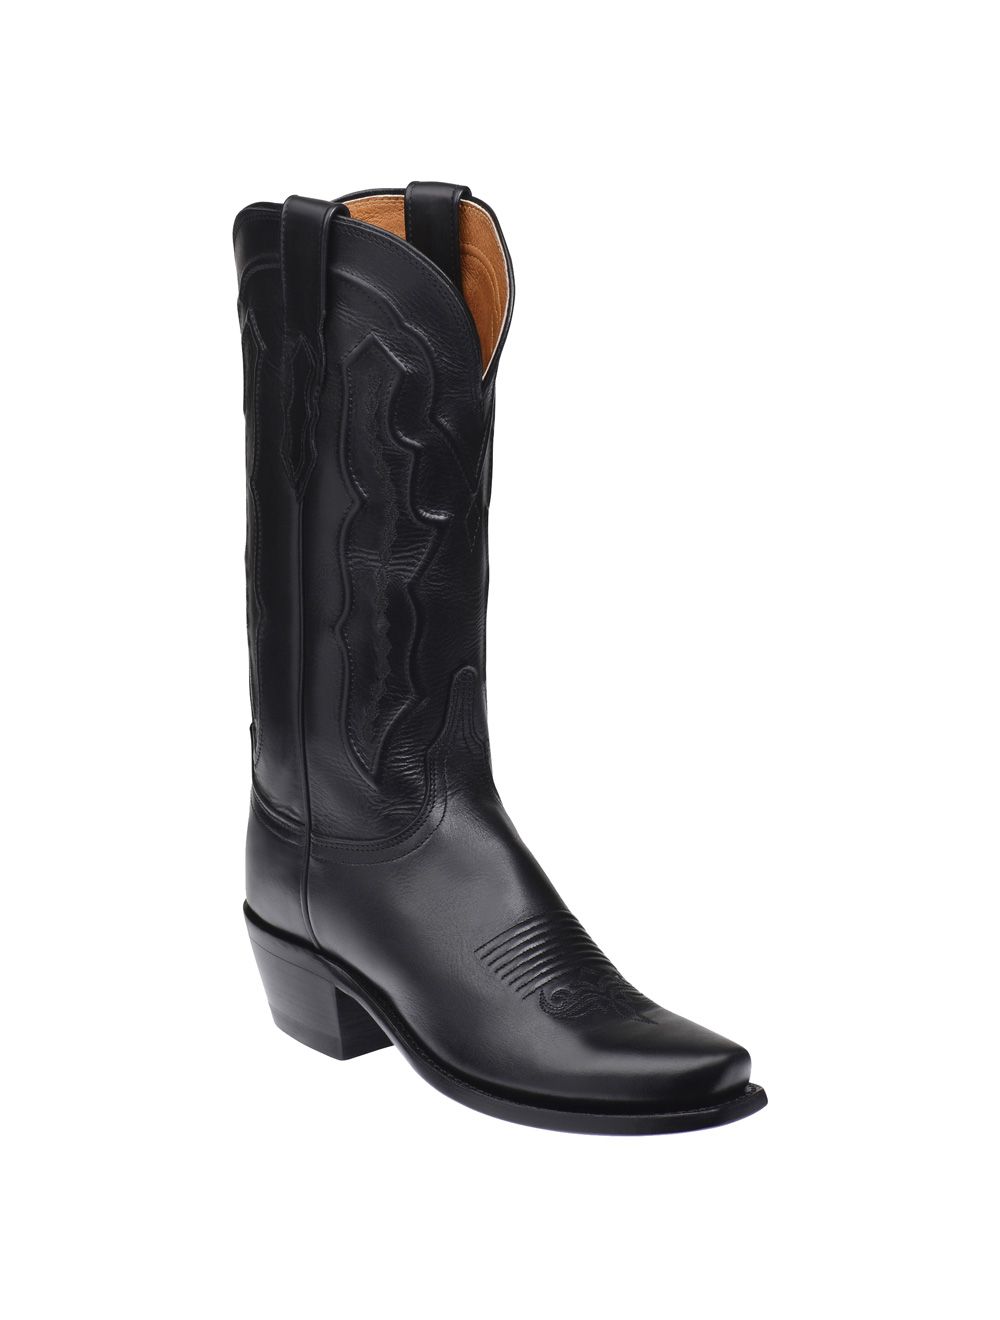 Lucchese Women's Black Leather Narrow Square Toe Western Boots